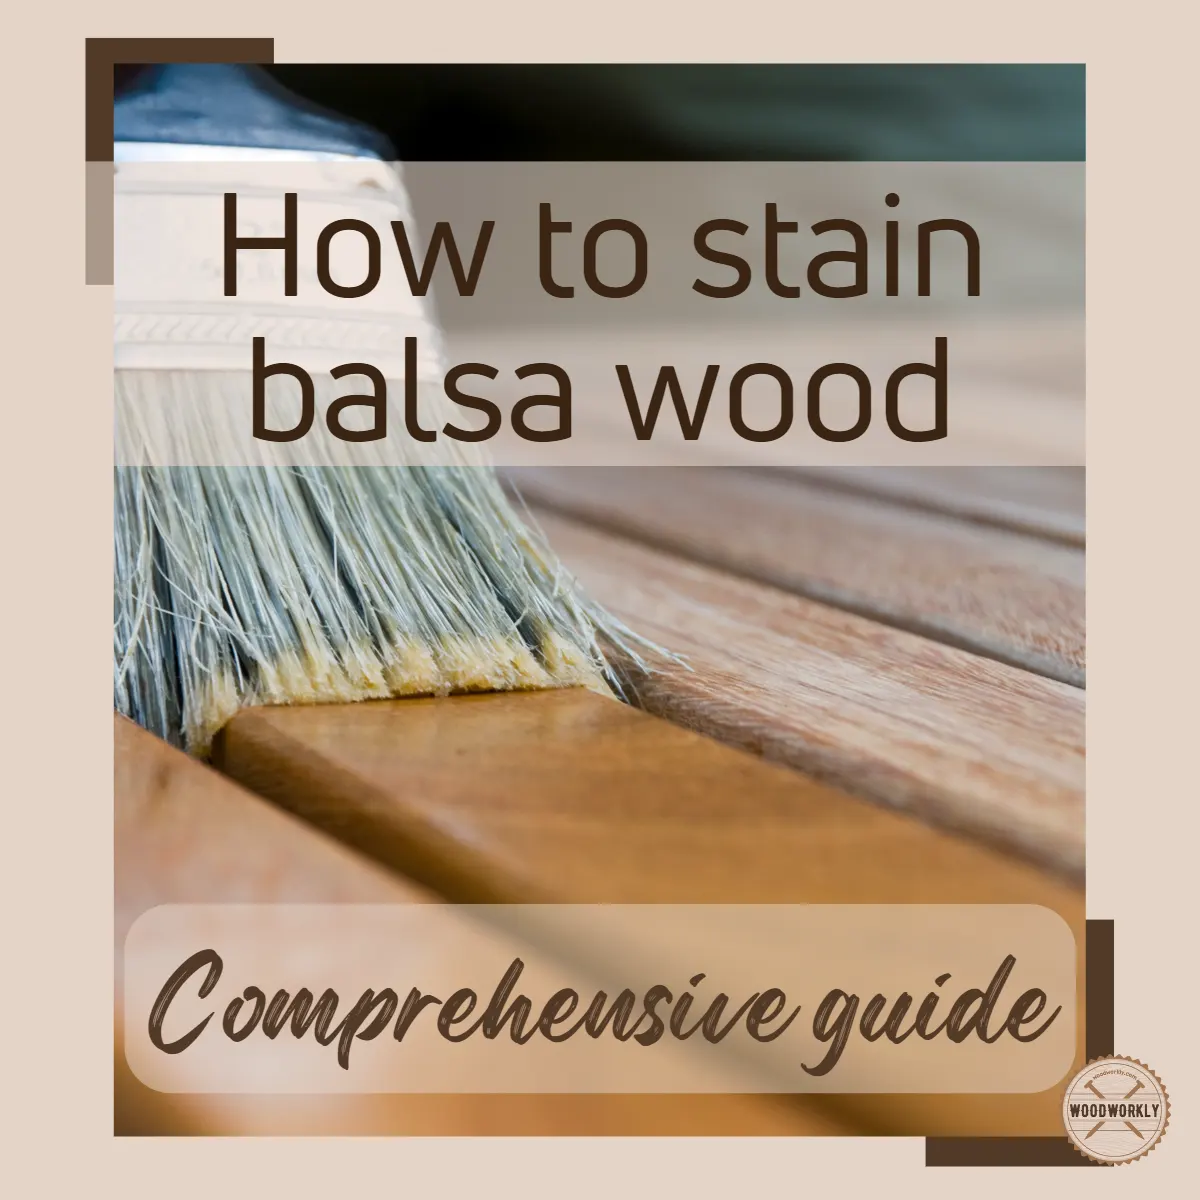 How to stain balsa wood